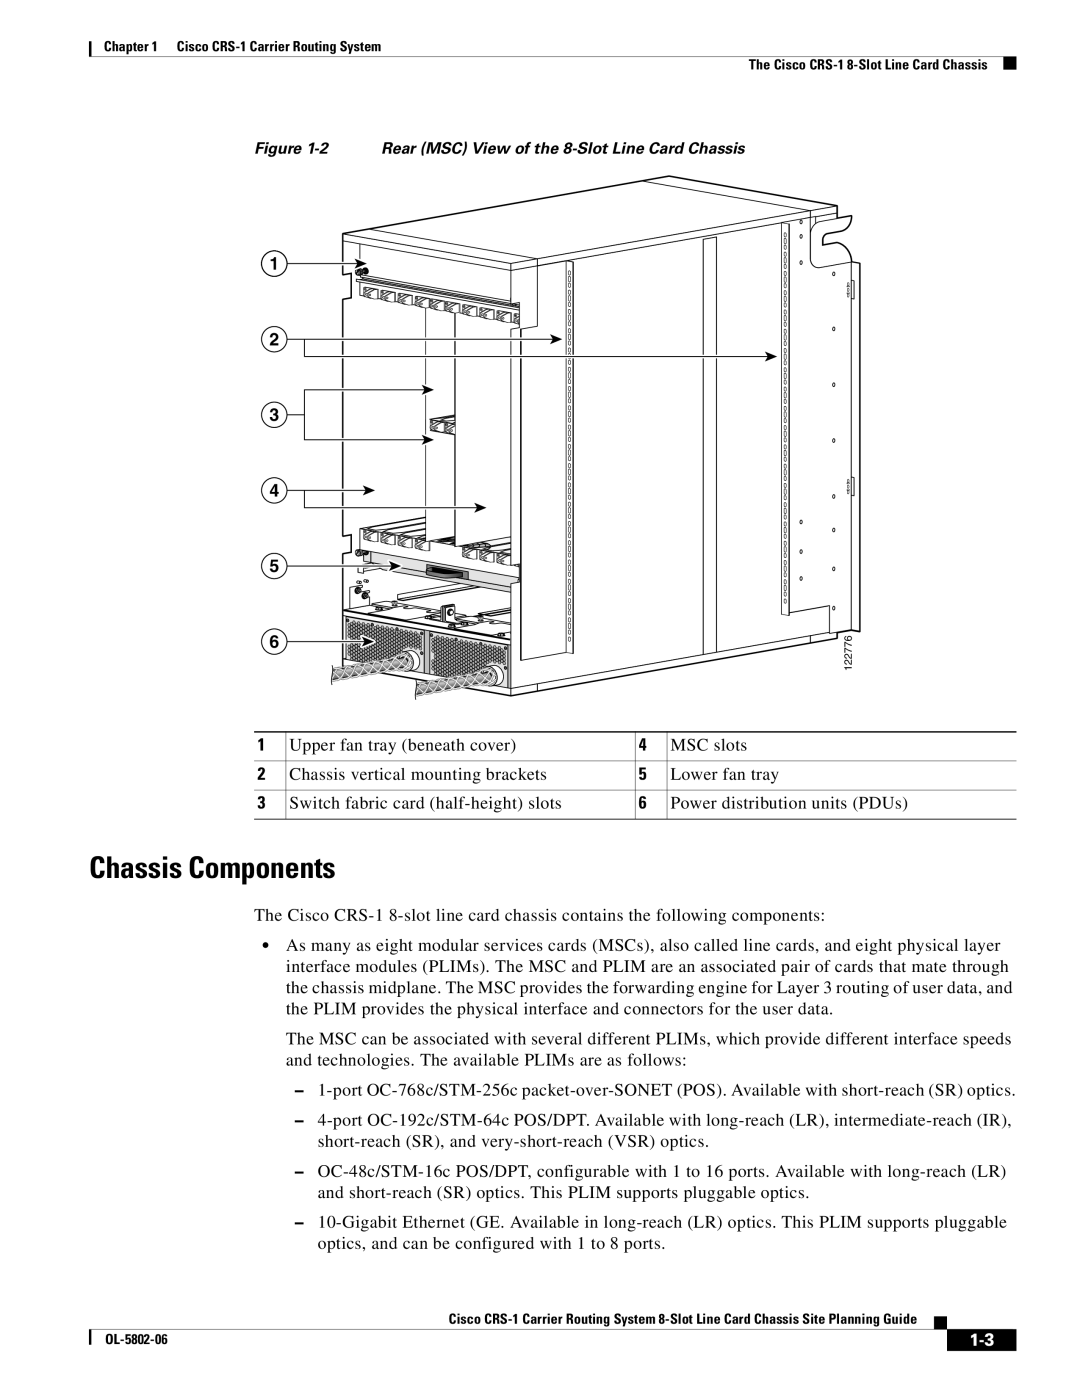 Cisco Systems CRS-1 specifications Chassis Components, Upper fan tray beneath cover, MSC slots, Lower fan tray 